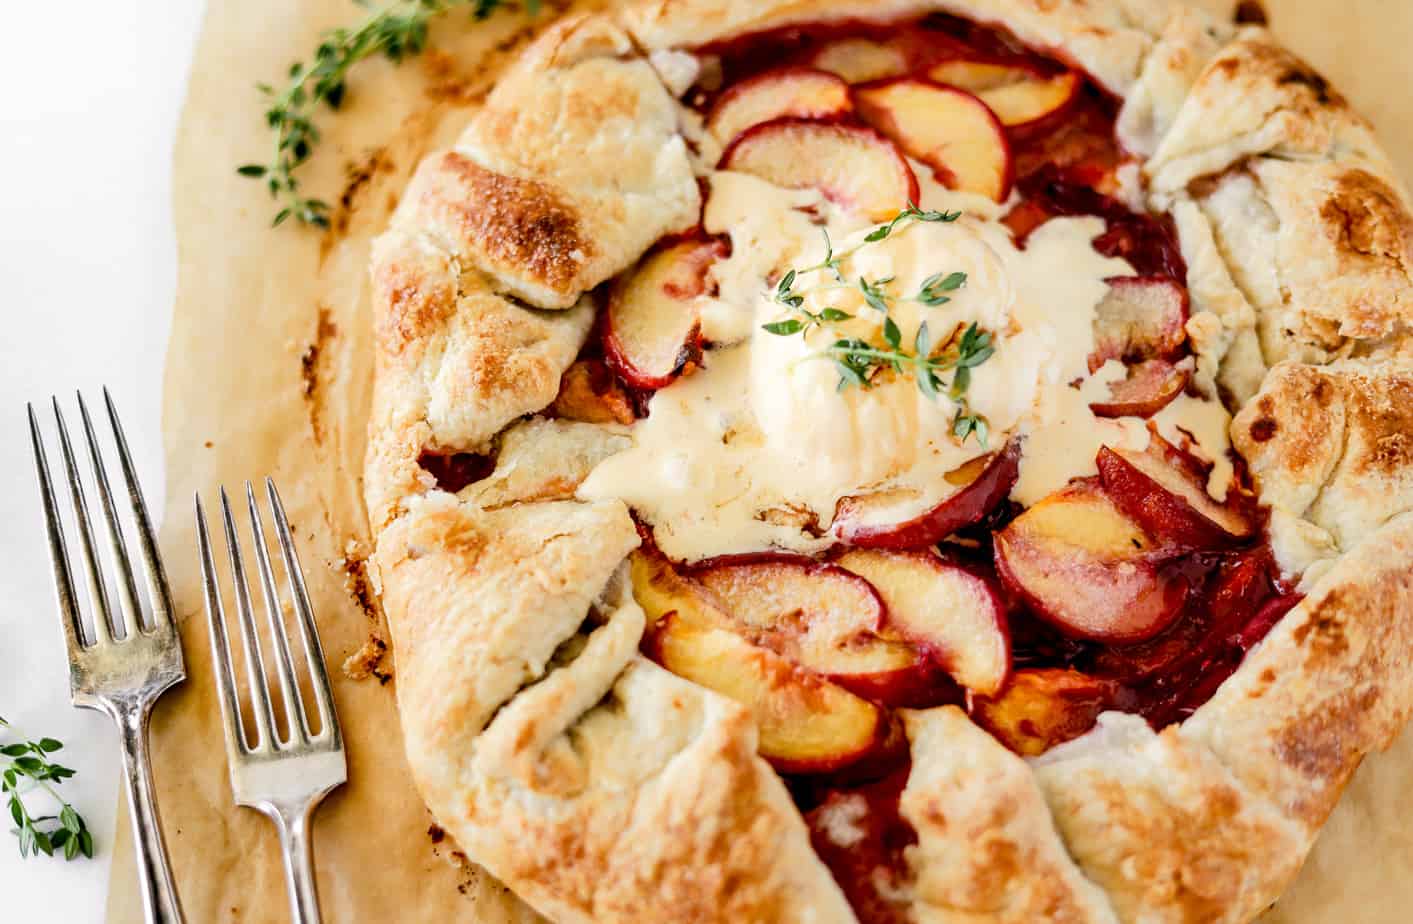 Fresh thyme sprigs over a peach galette topped with vanilla ice cream that's beggining to melt into the peaches